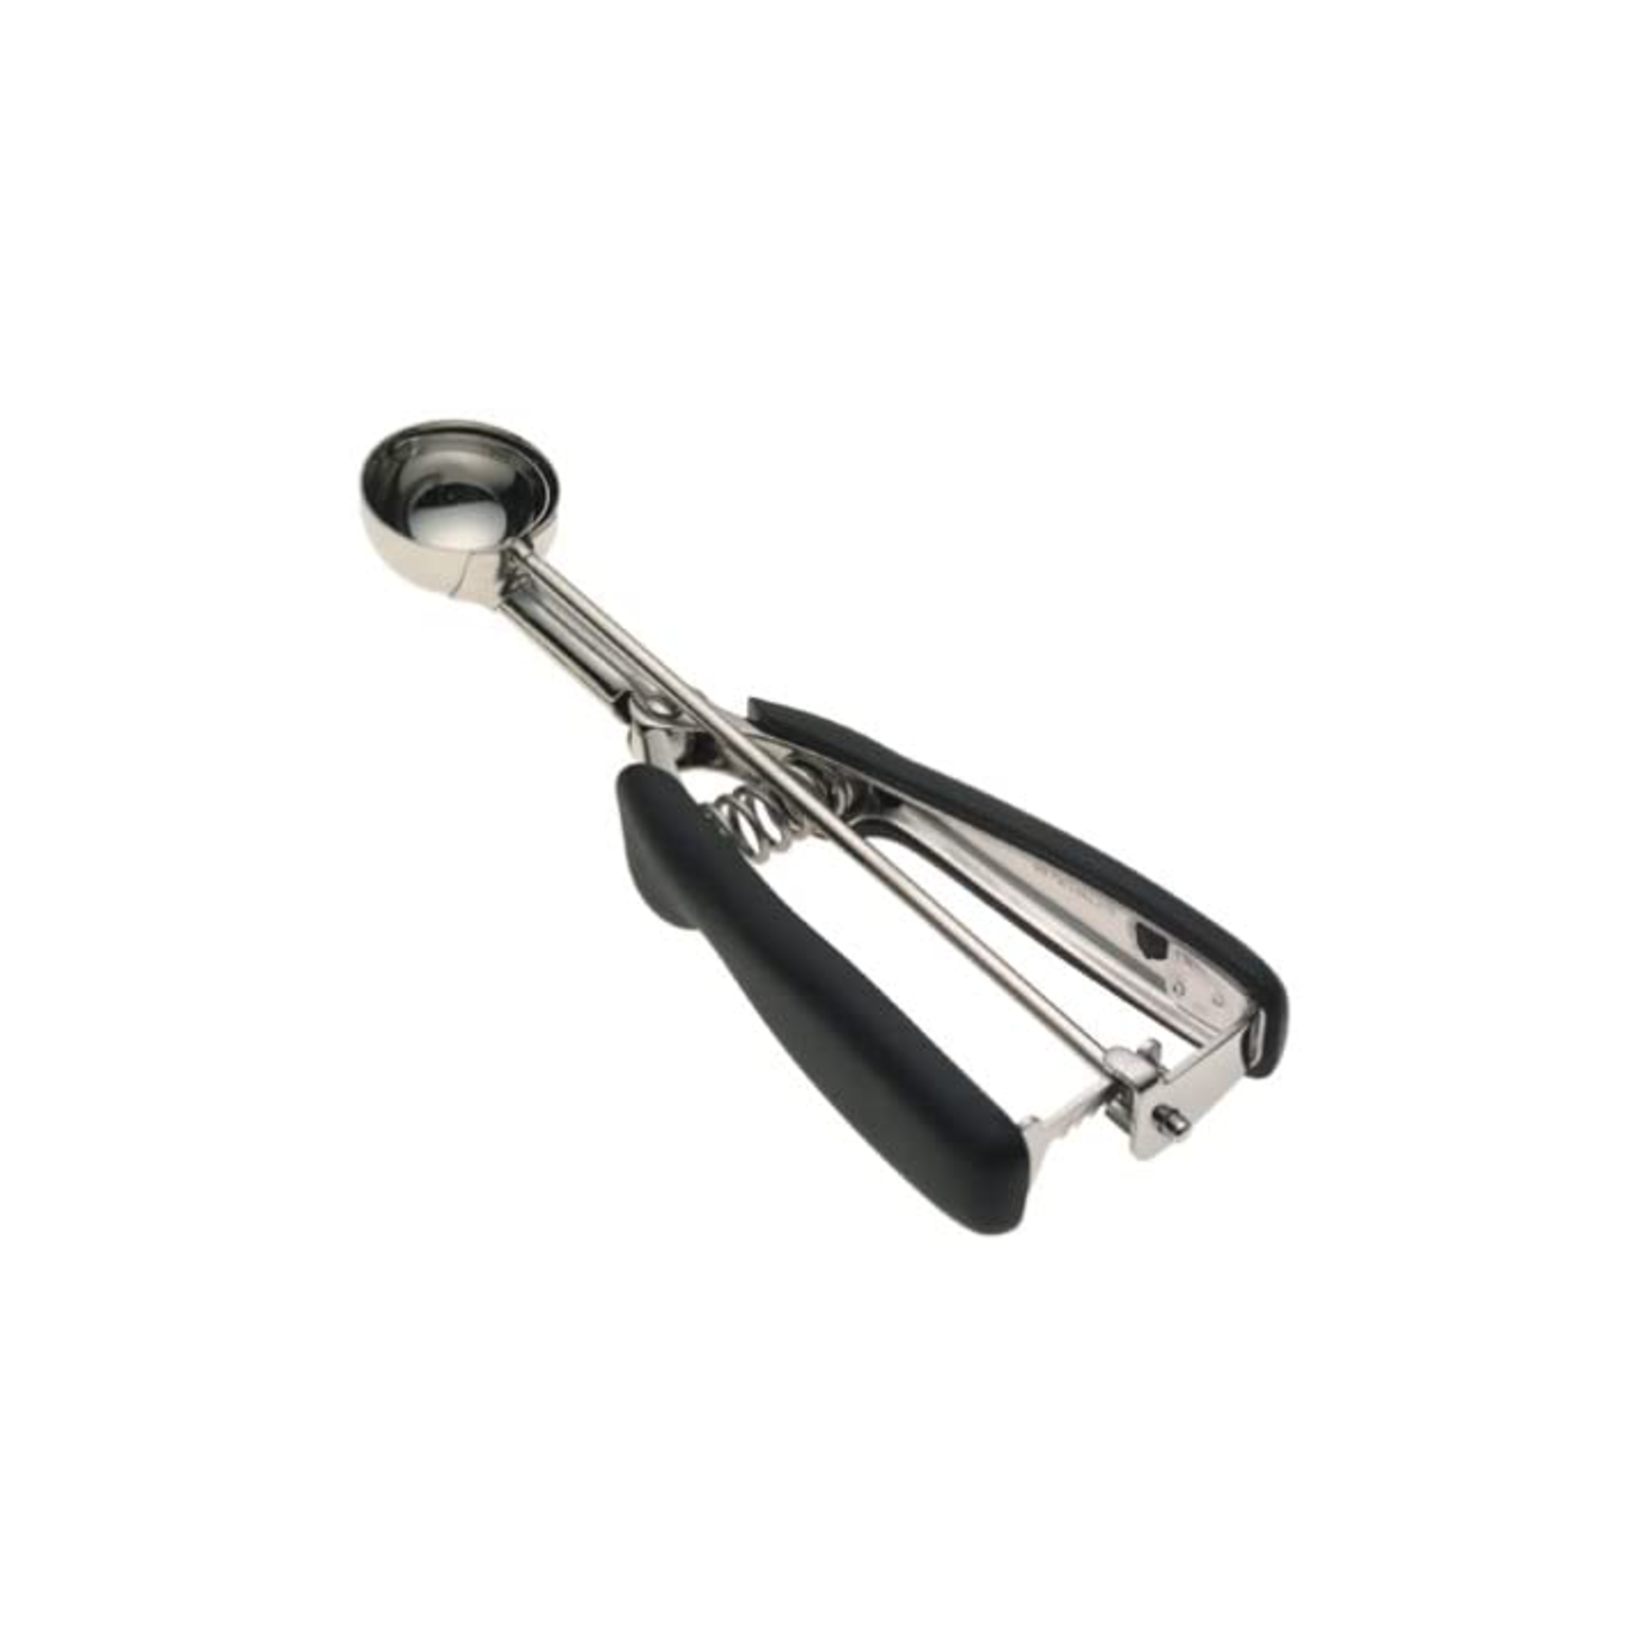 OXO OXO Small Cookie Scoop